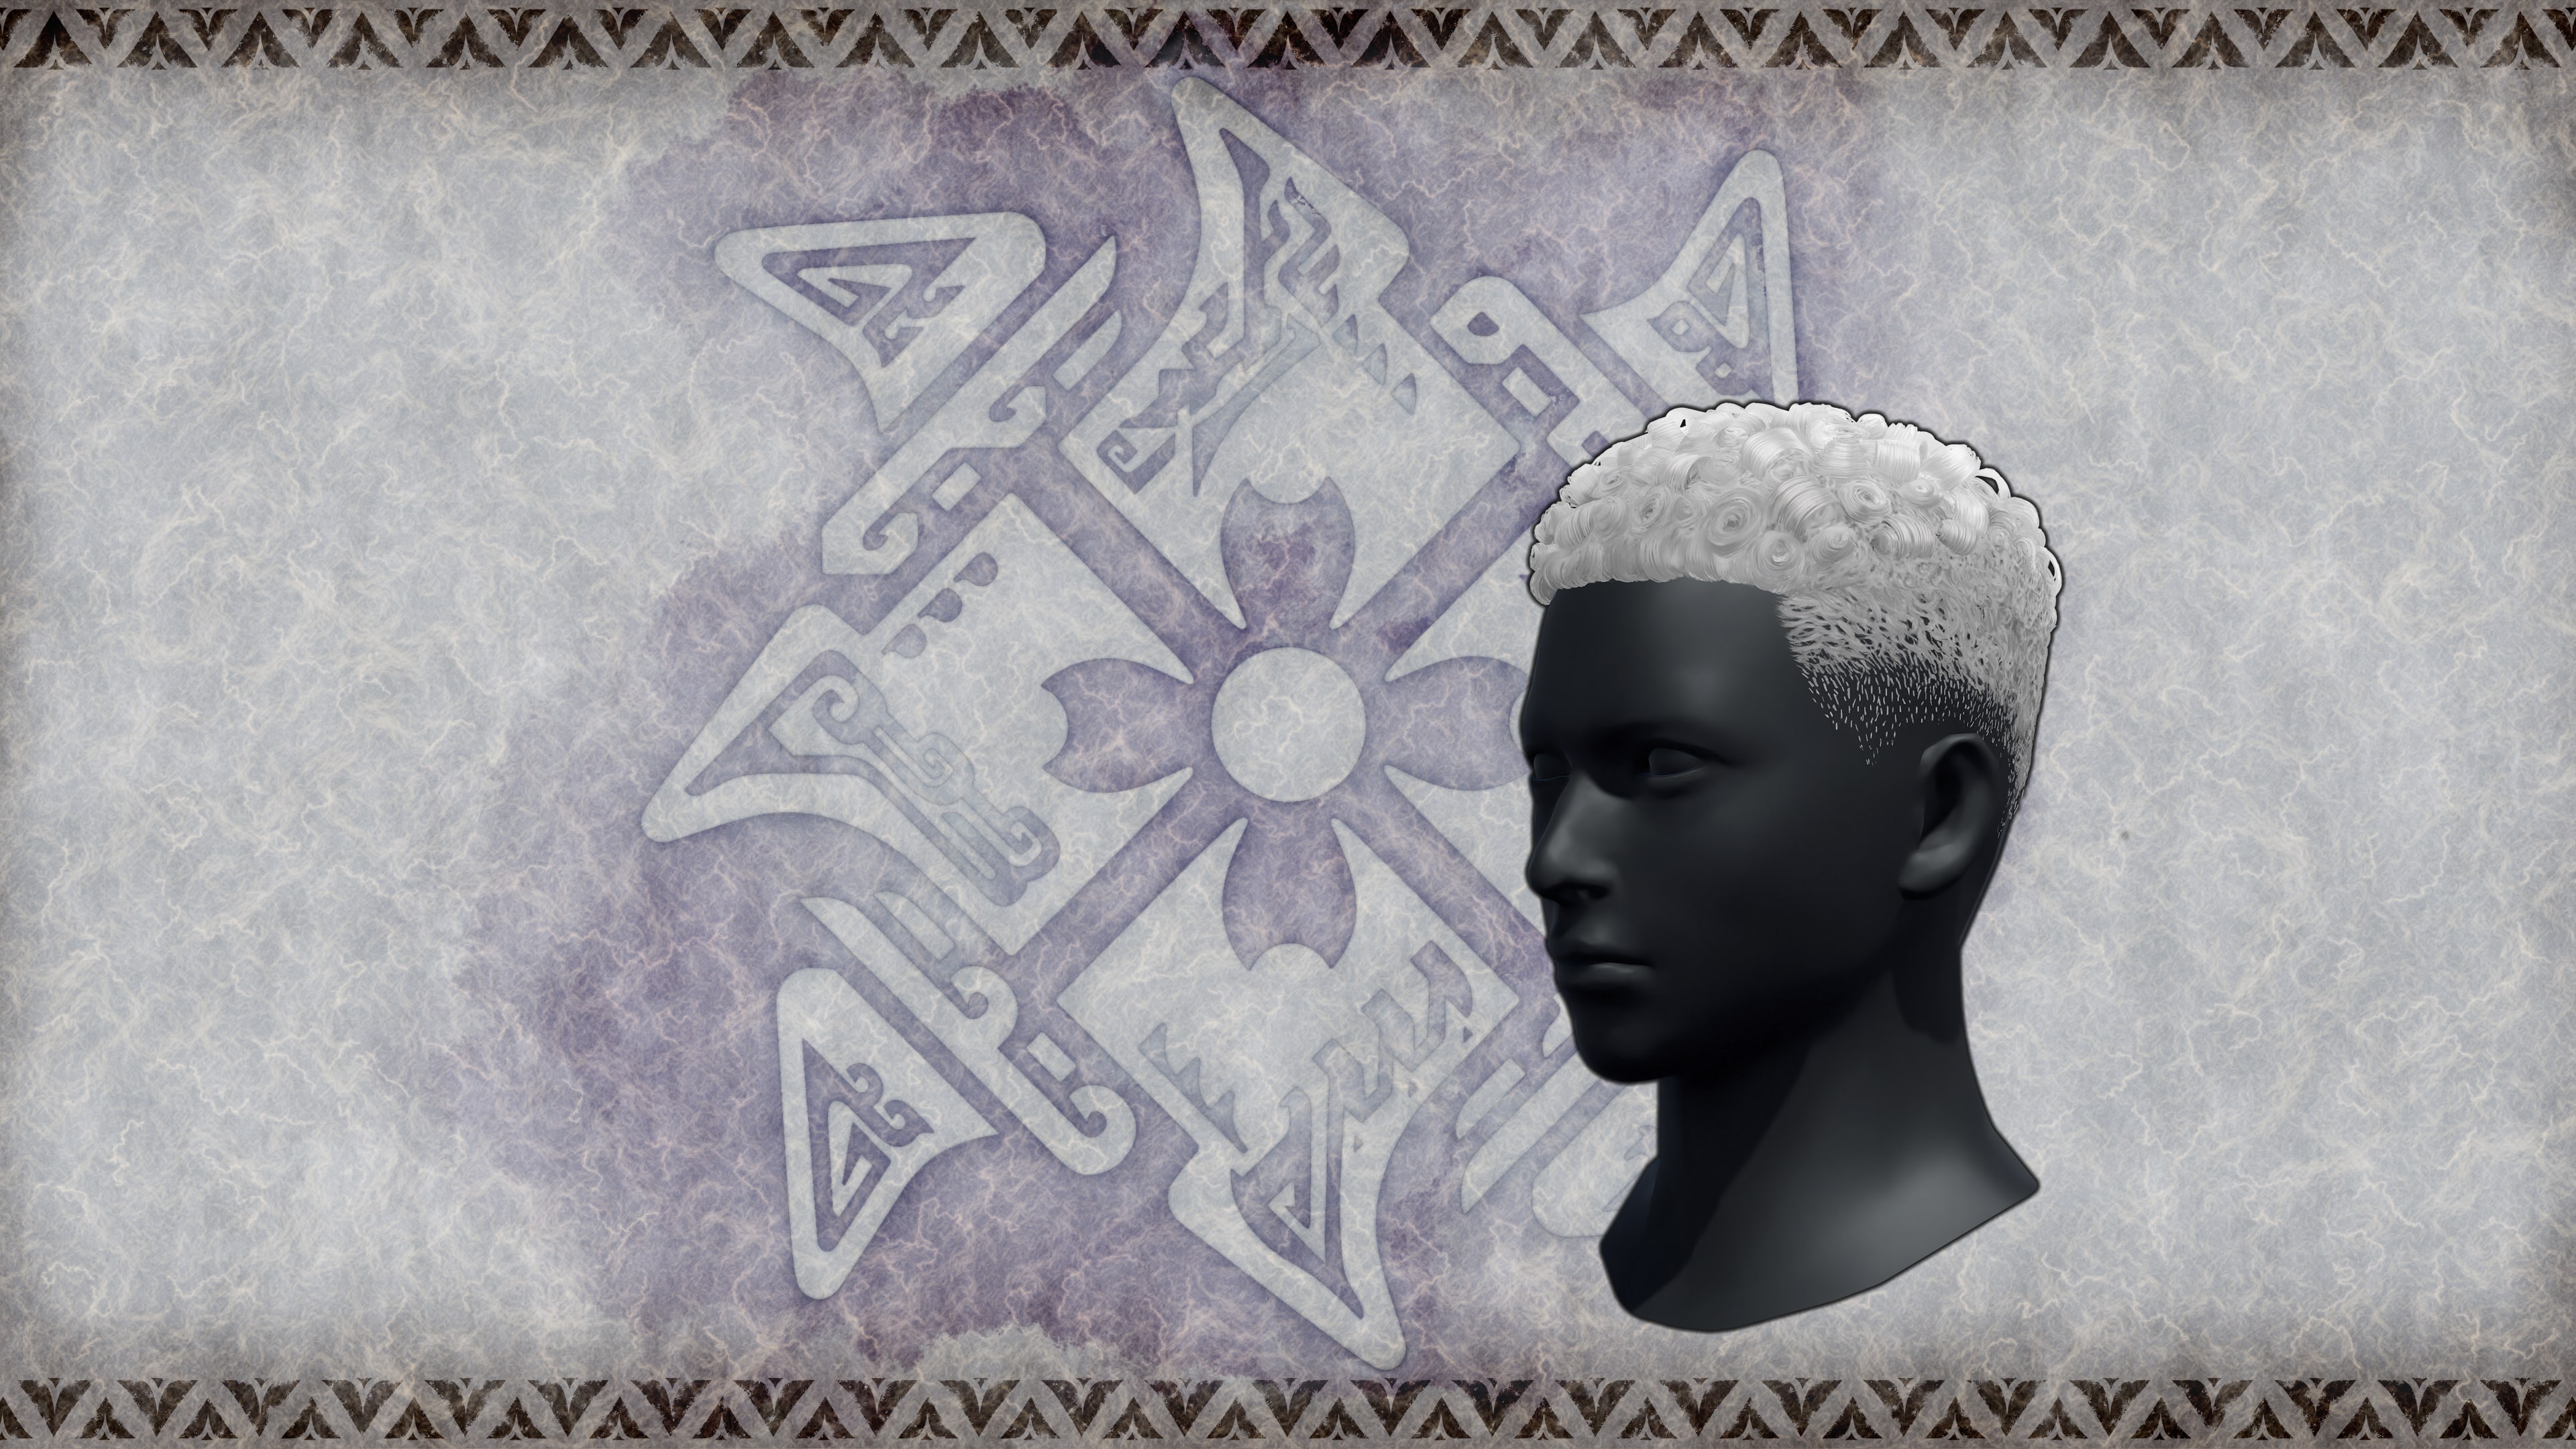 Monster Hunter Rise - "DLC 16" hairstyle